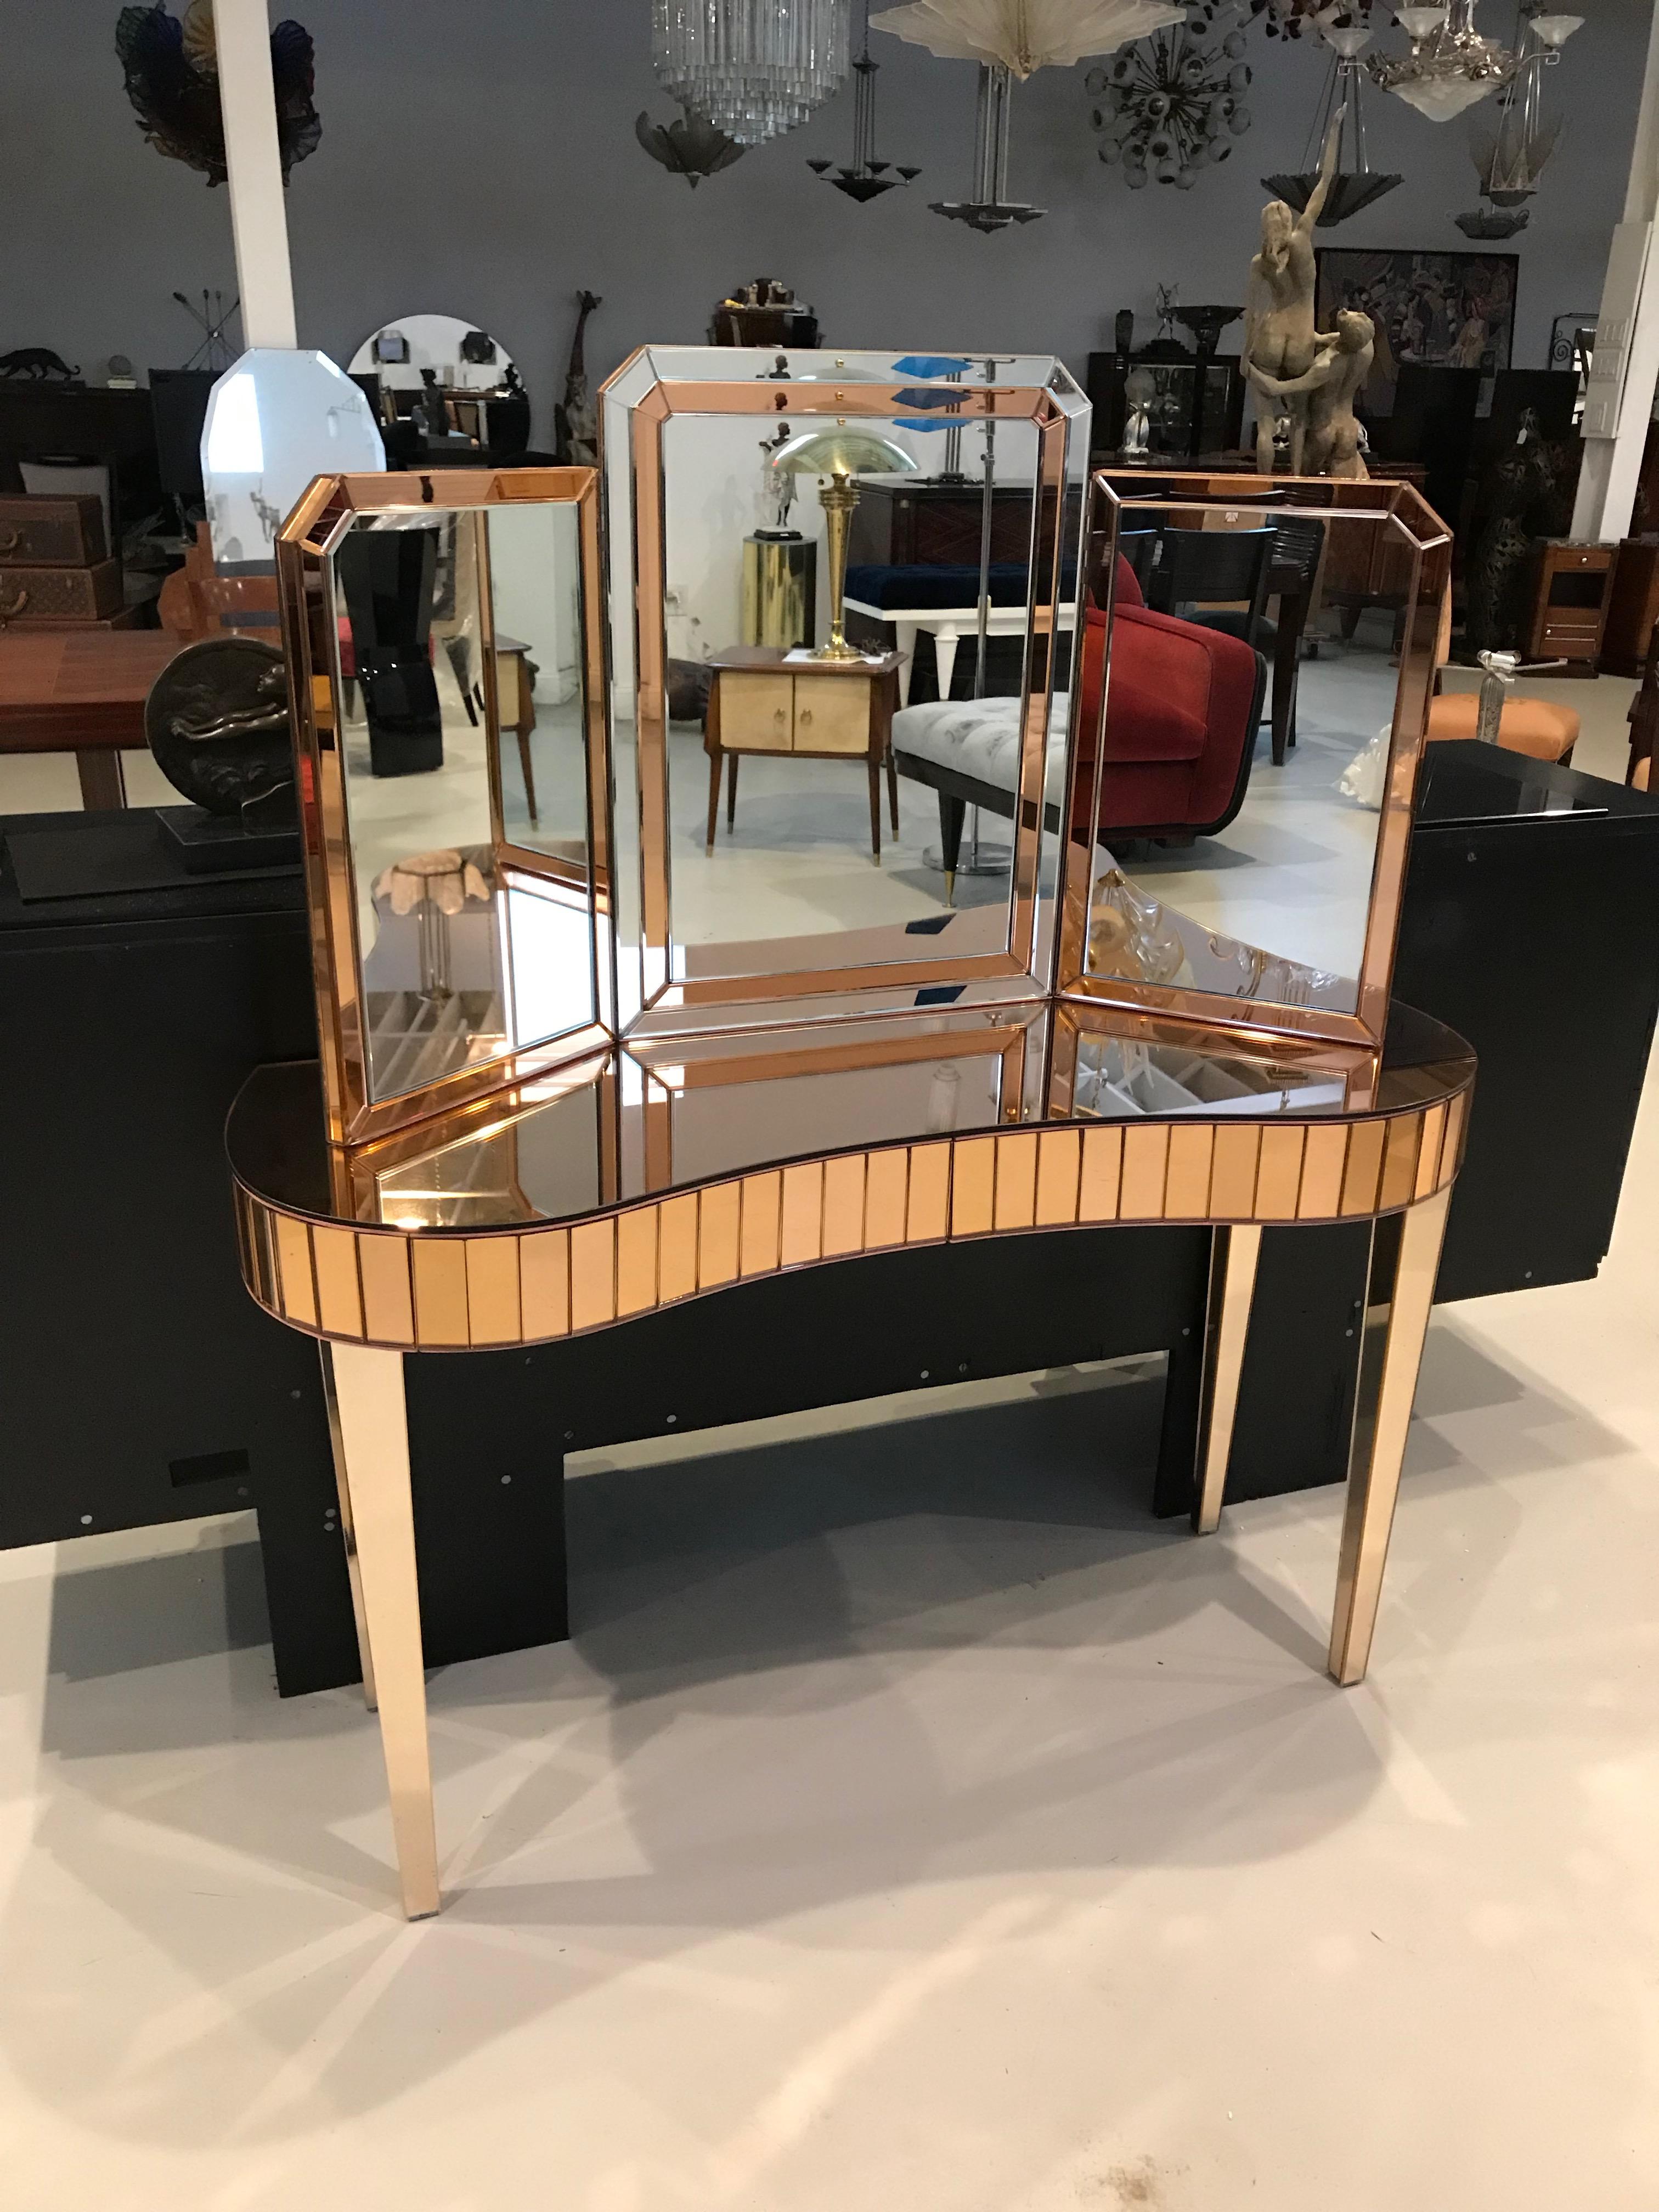 Mid-Century Modern mirrored vanity with matching mirror. The mirror can either be hung on the wall or can sit on the vanity. The vanity is all mirrored with an Art Deco motif. Having two draws for plenty of storage.

Vanity dimensions:
H 28